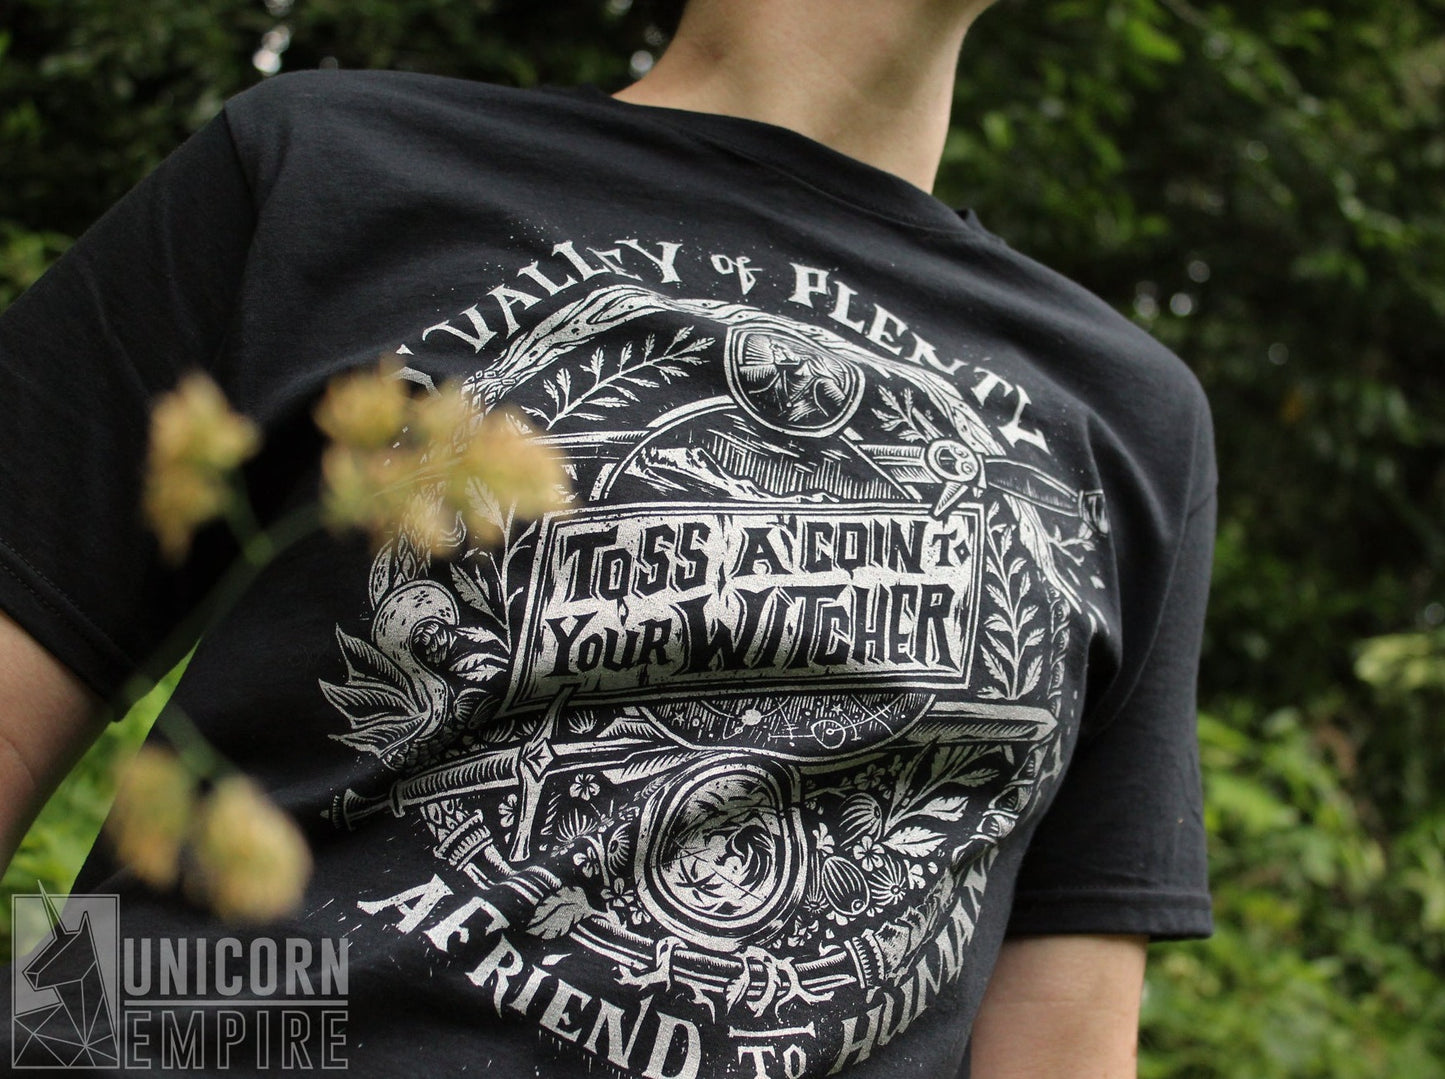 Toss a Coing to Your Witcher Graphic Tee